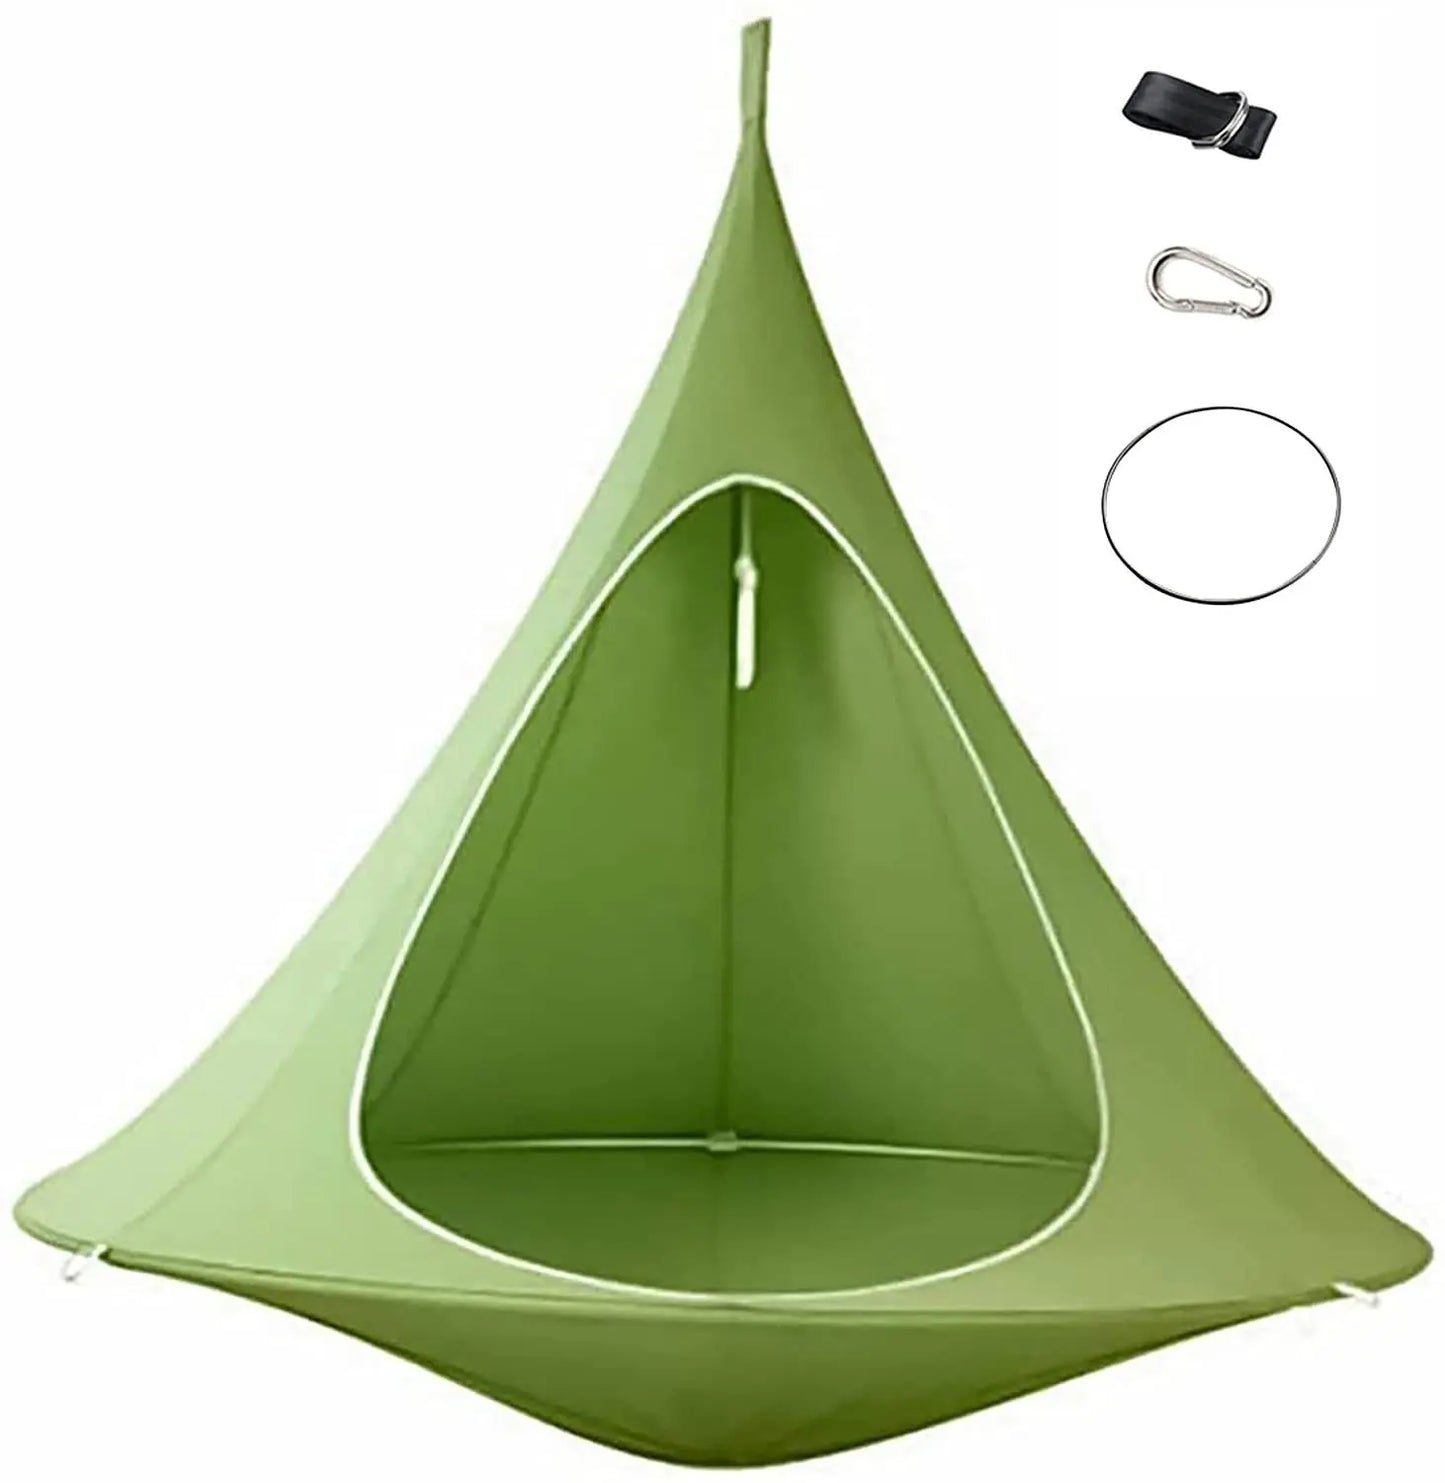 Camping tent double deck chair hanging hammock chair outdoor swing hammock - Tatooine Nomad